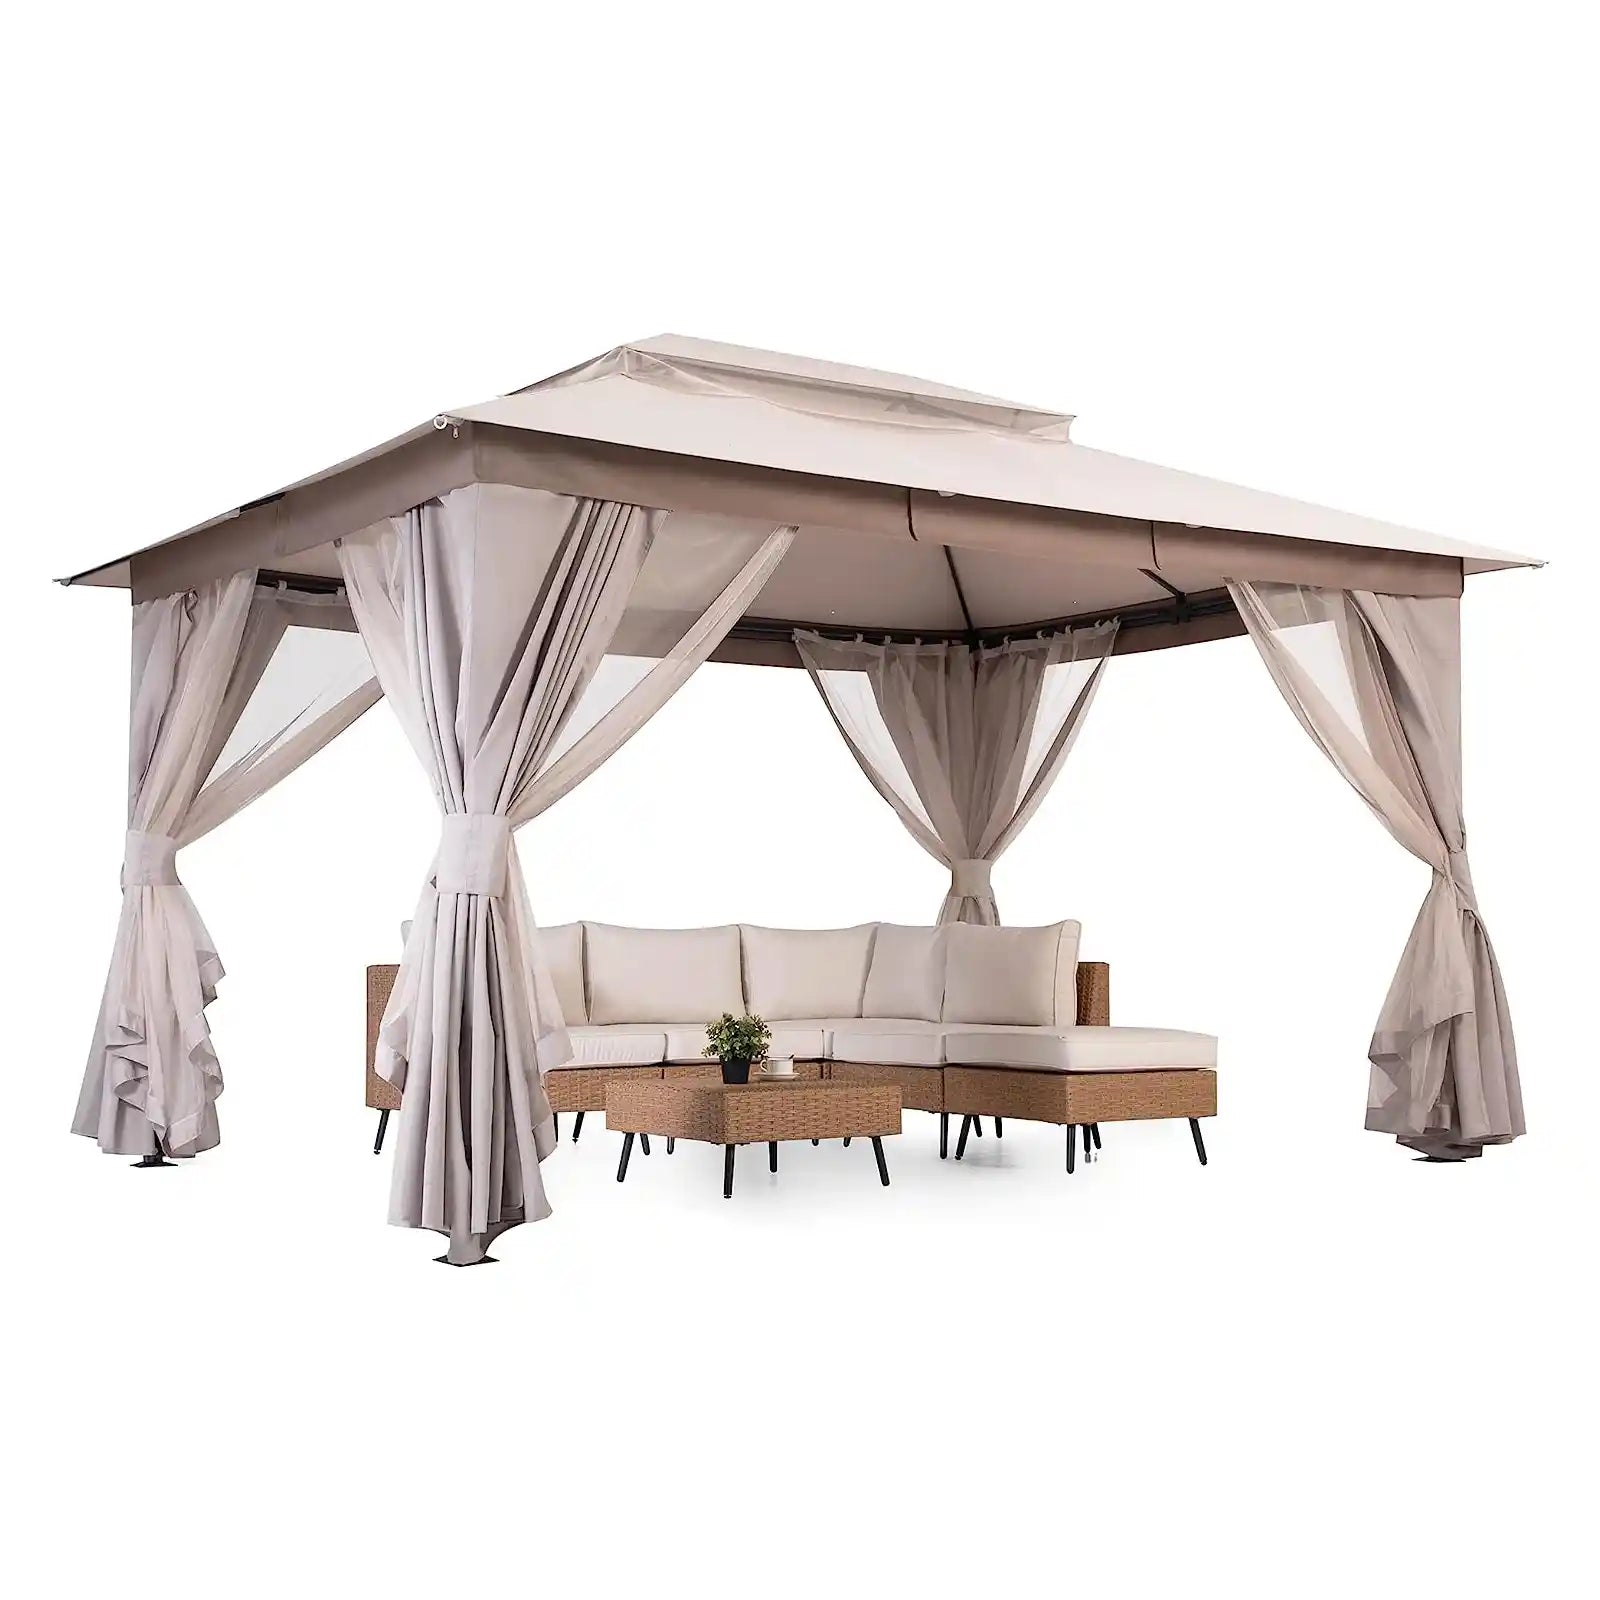 Outdoor Patio Gazebo 10'x13' with Expansion Bolts, Heavy Duty Party Tent & Shelter with Double Roofs, Mosquito Nettings and Privacy Screens for Backyard, Garden, Lawn, Smoke Grey